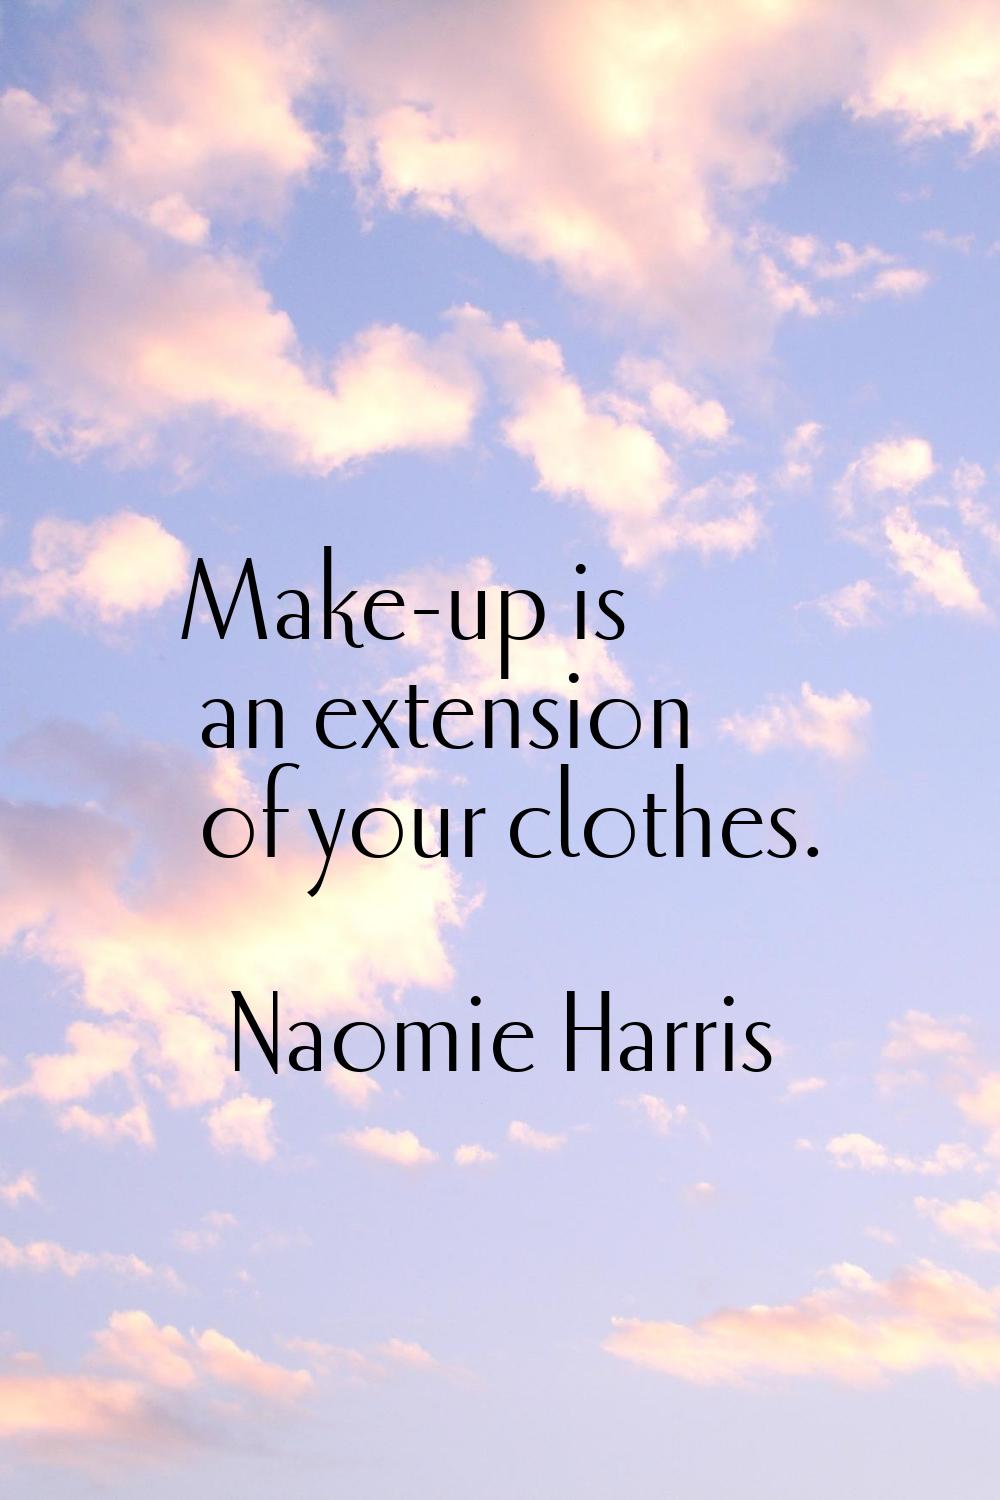 Make-up is an extension of your clothes.